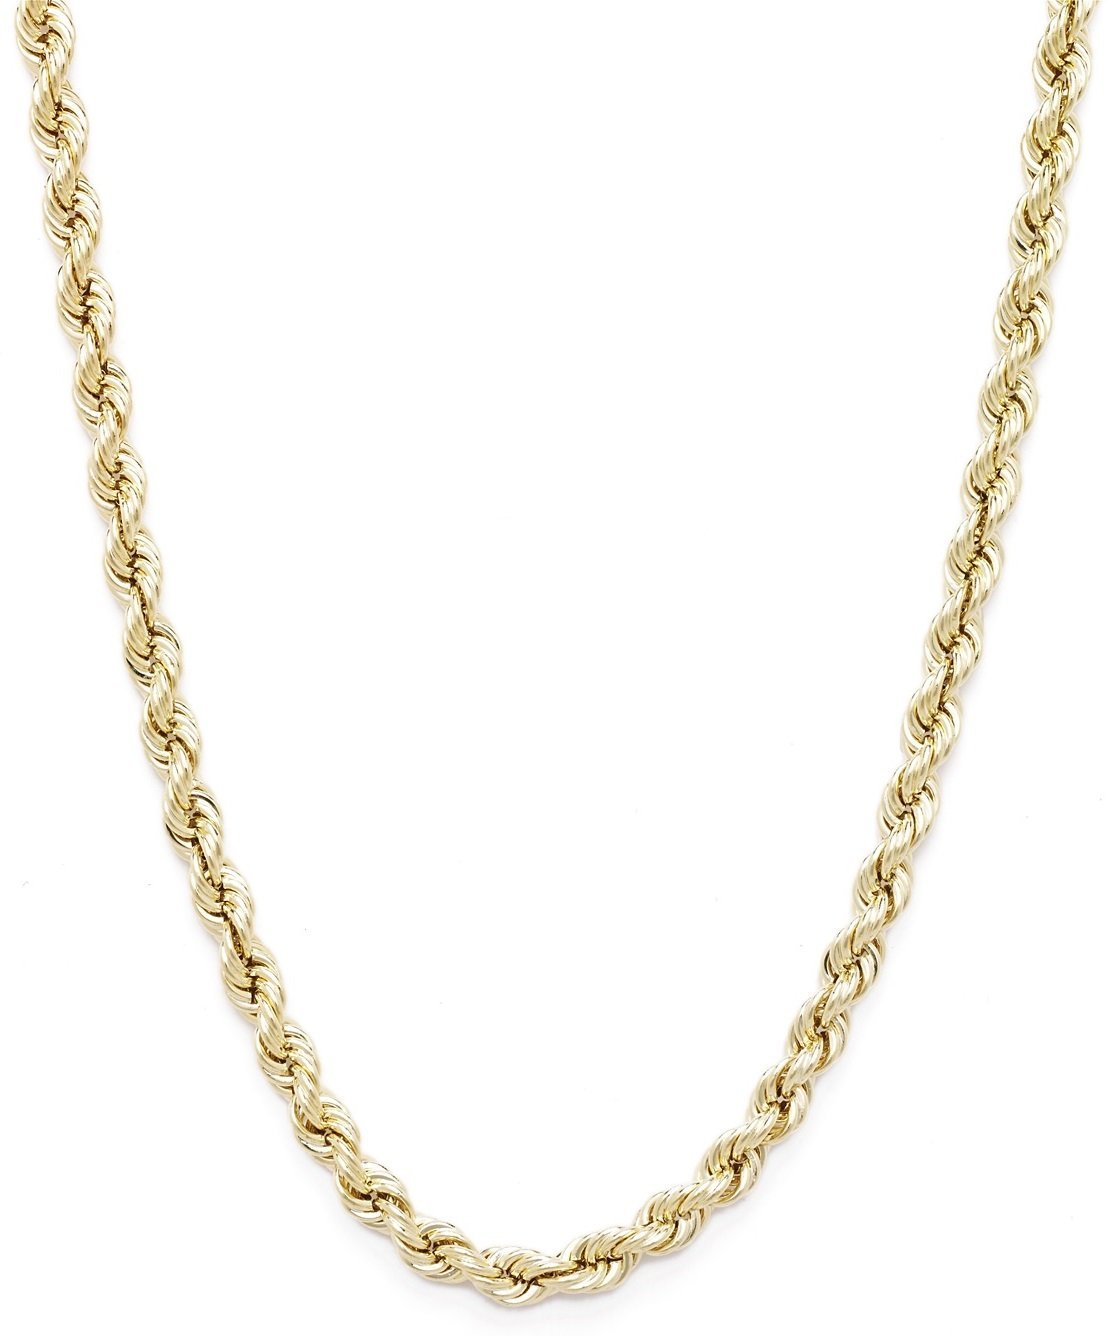 10k Yellow Gold Hollow Rope Chain Necklace with Lobster Claw Clasp, 2.5mm